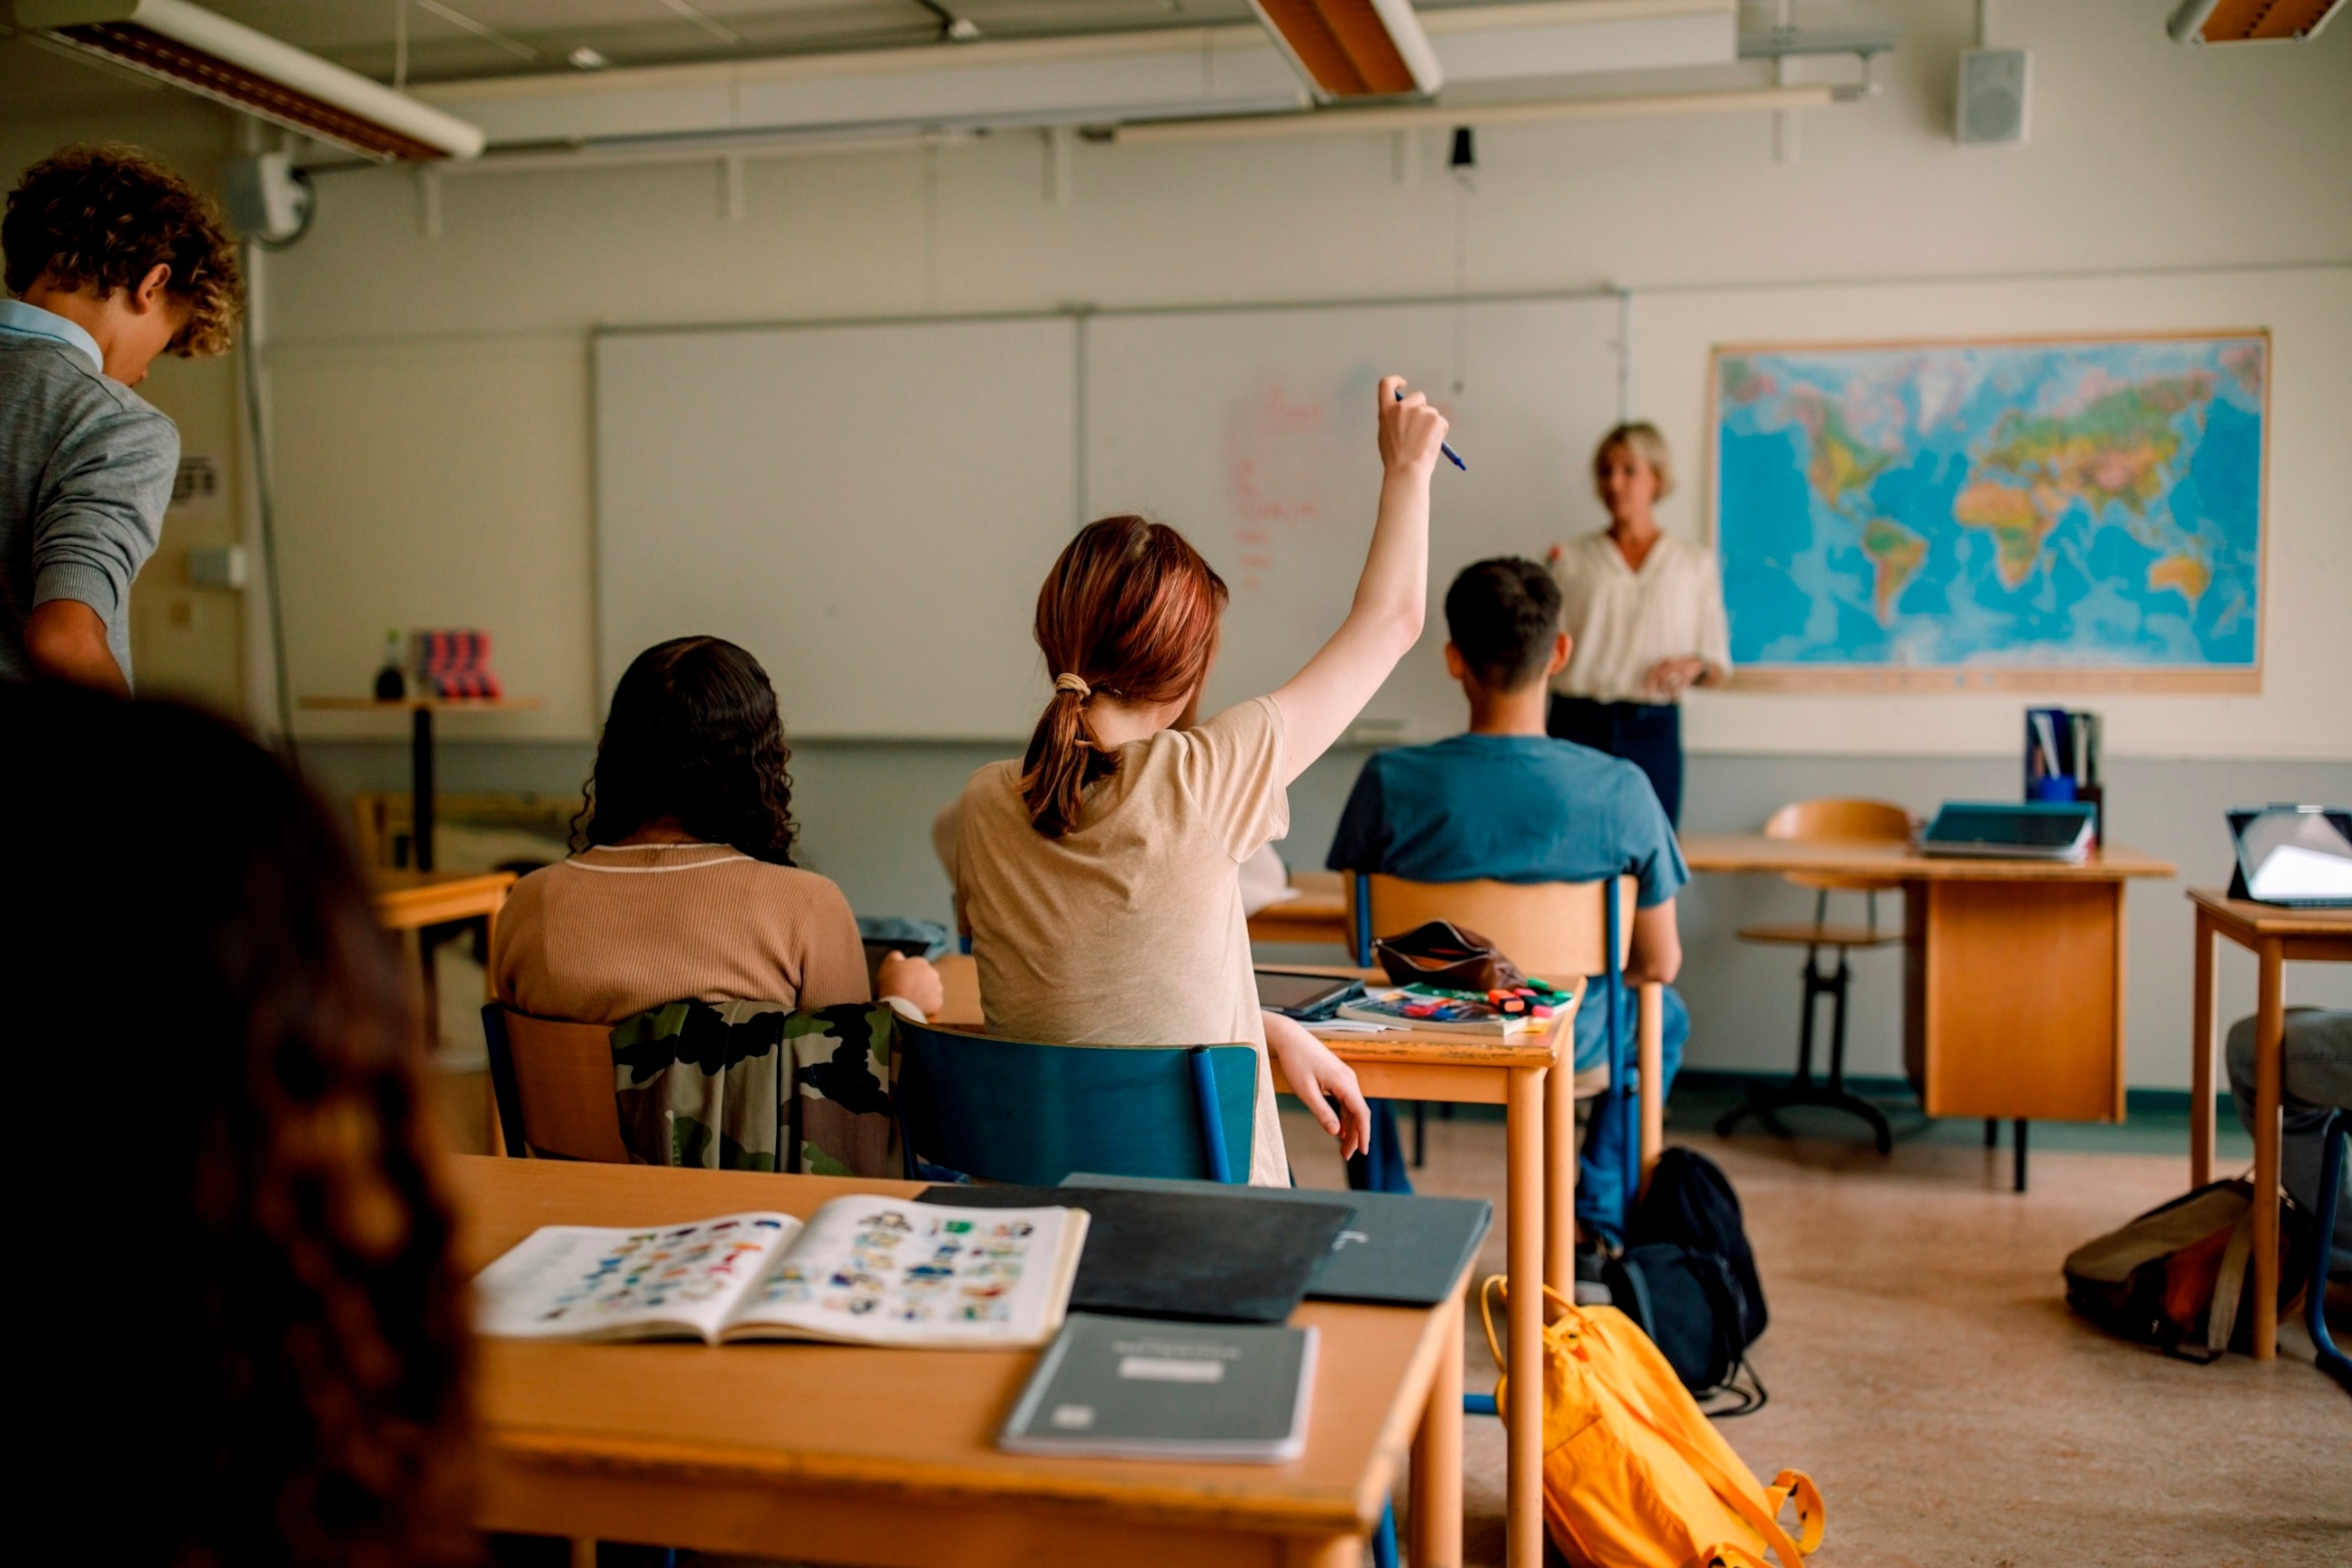 PHOTO: In this undated stock photo, a student raises her hand in class.